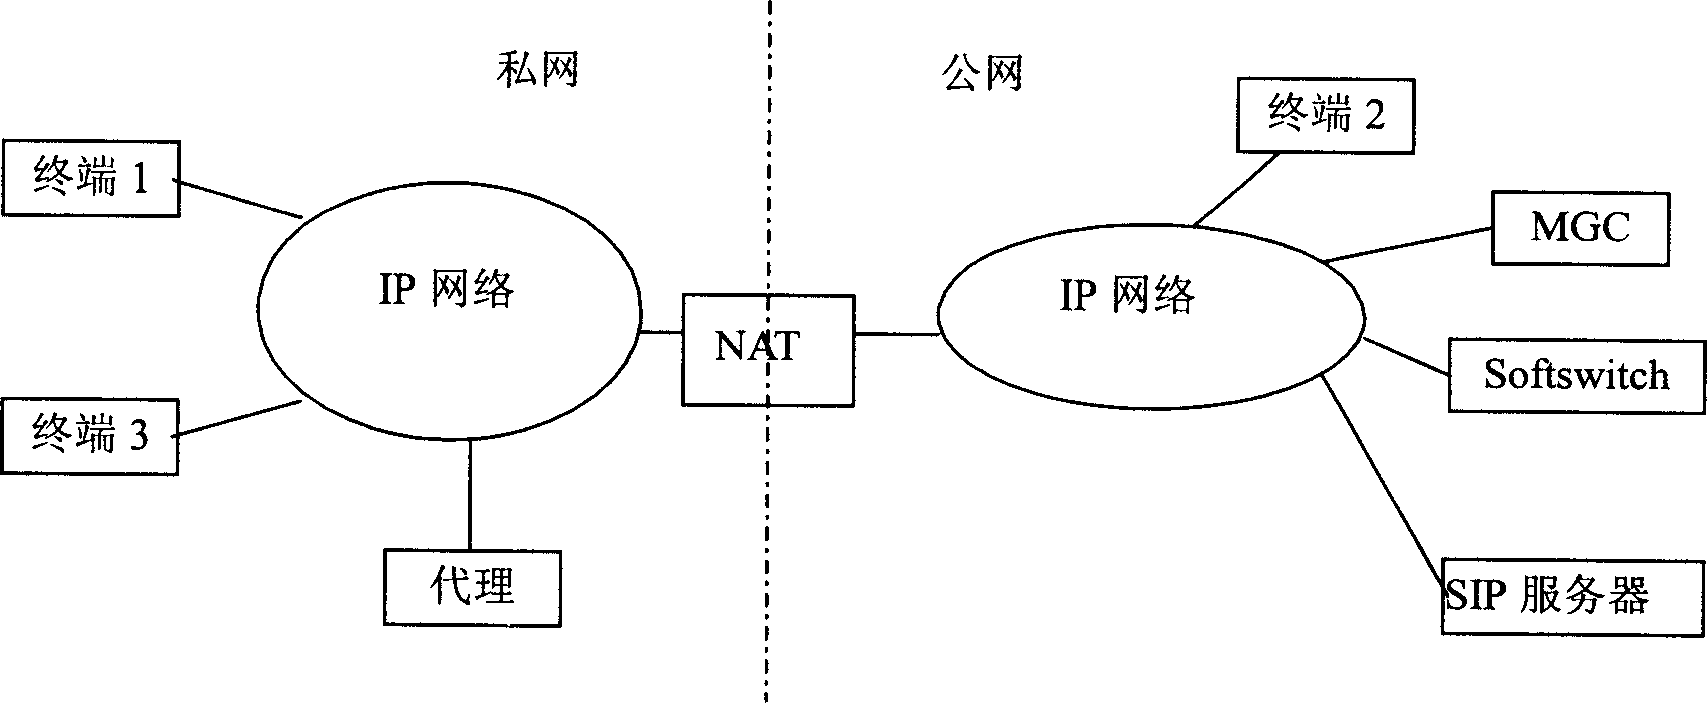 Method for implementing multimedia service NAT transition